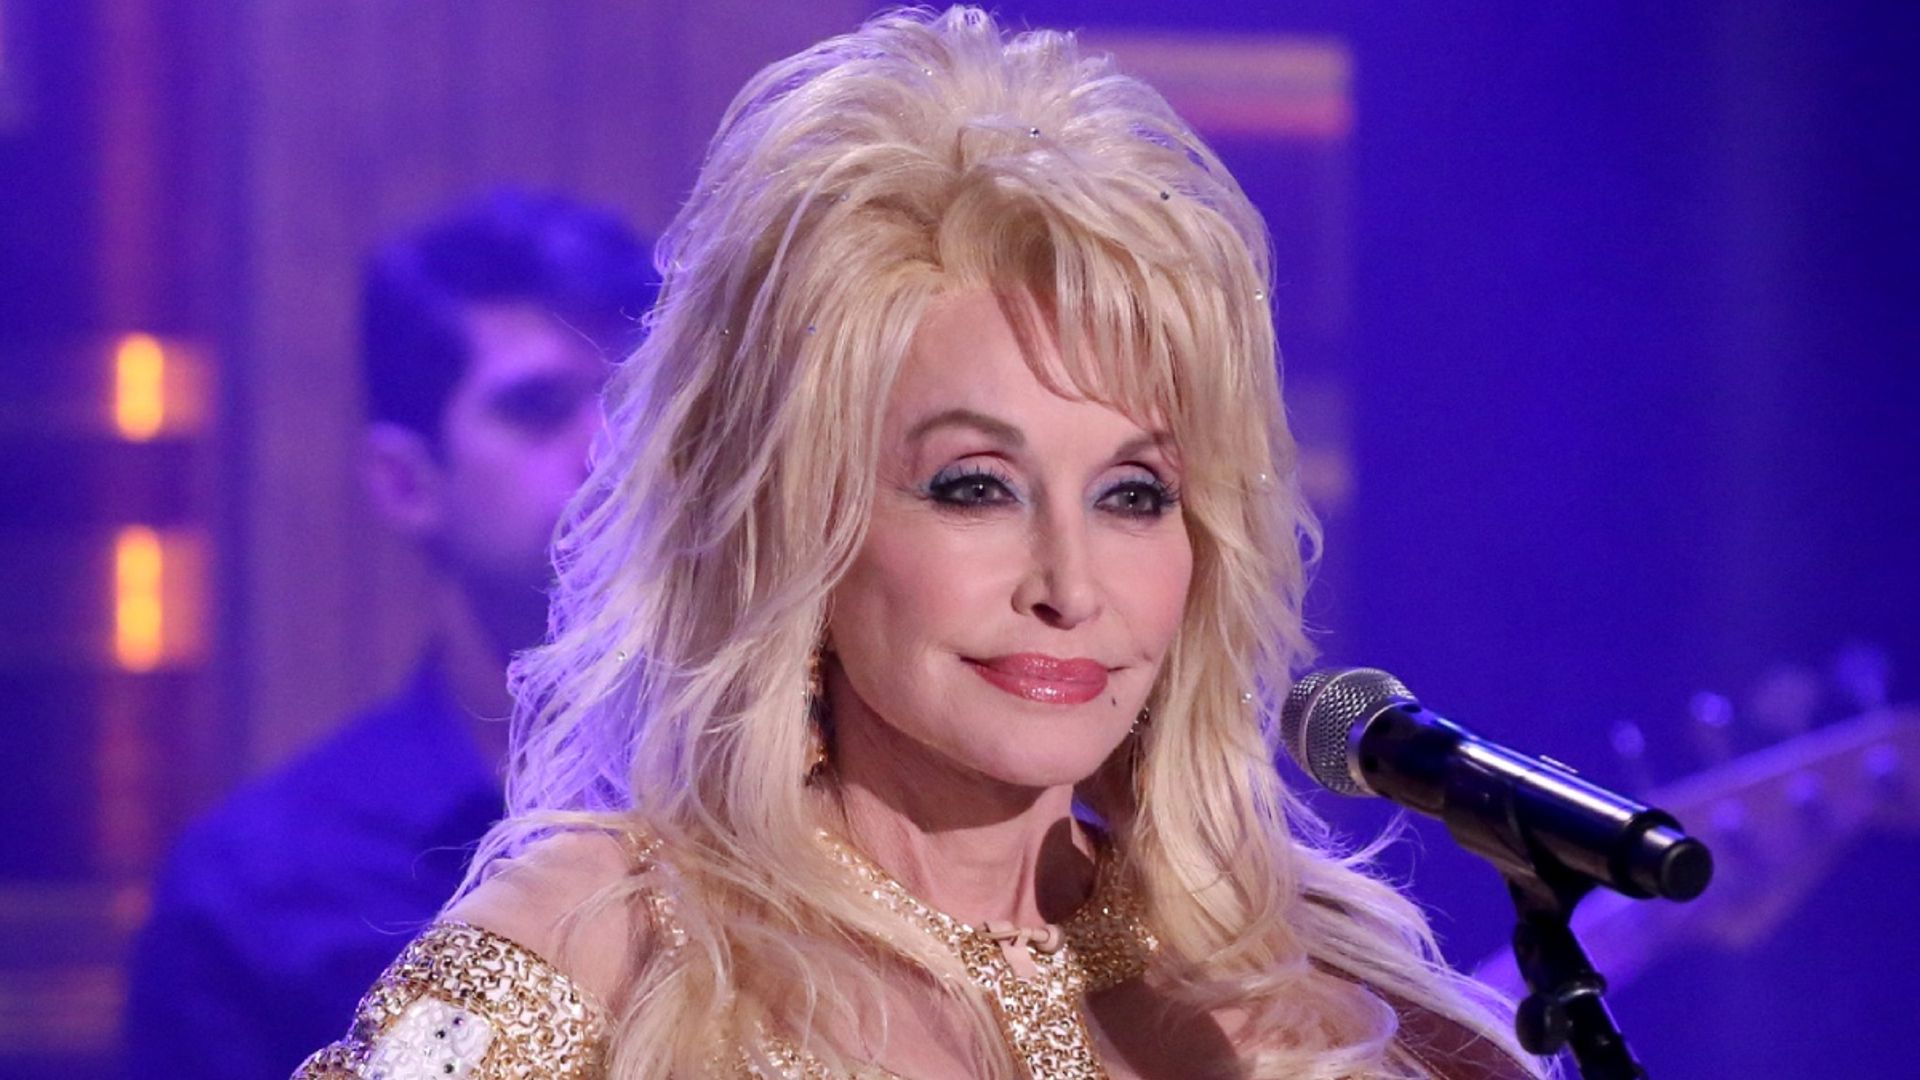 Dolly Parton takes fans by surprise as she bows out of Rock and Roll Hall of Fame contention